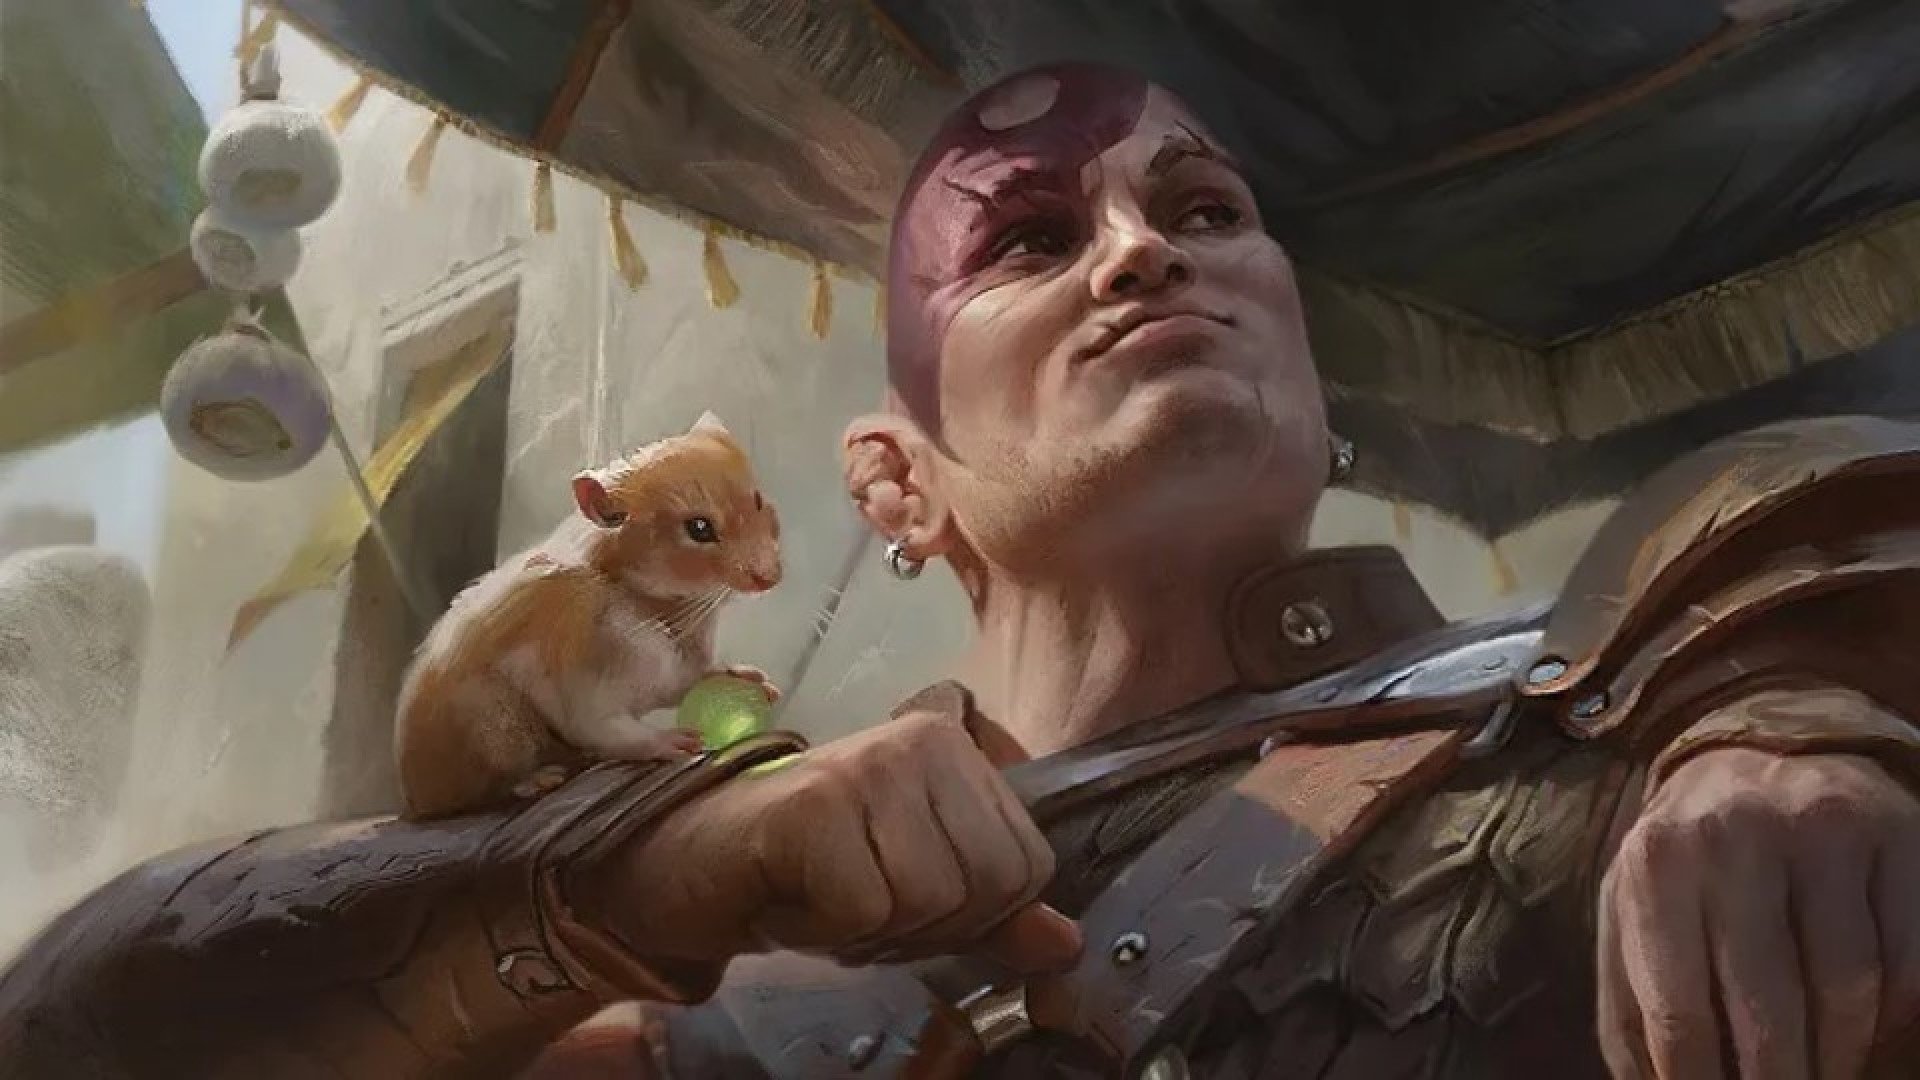 DnD human 5e character Minsc and his hamster Boo (art by Wizards of the Coast)